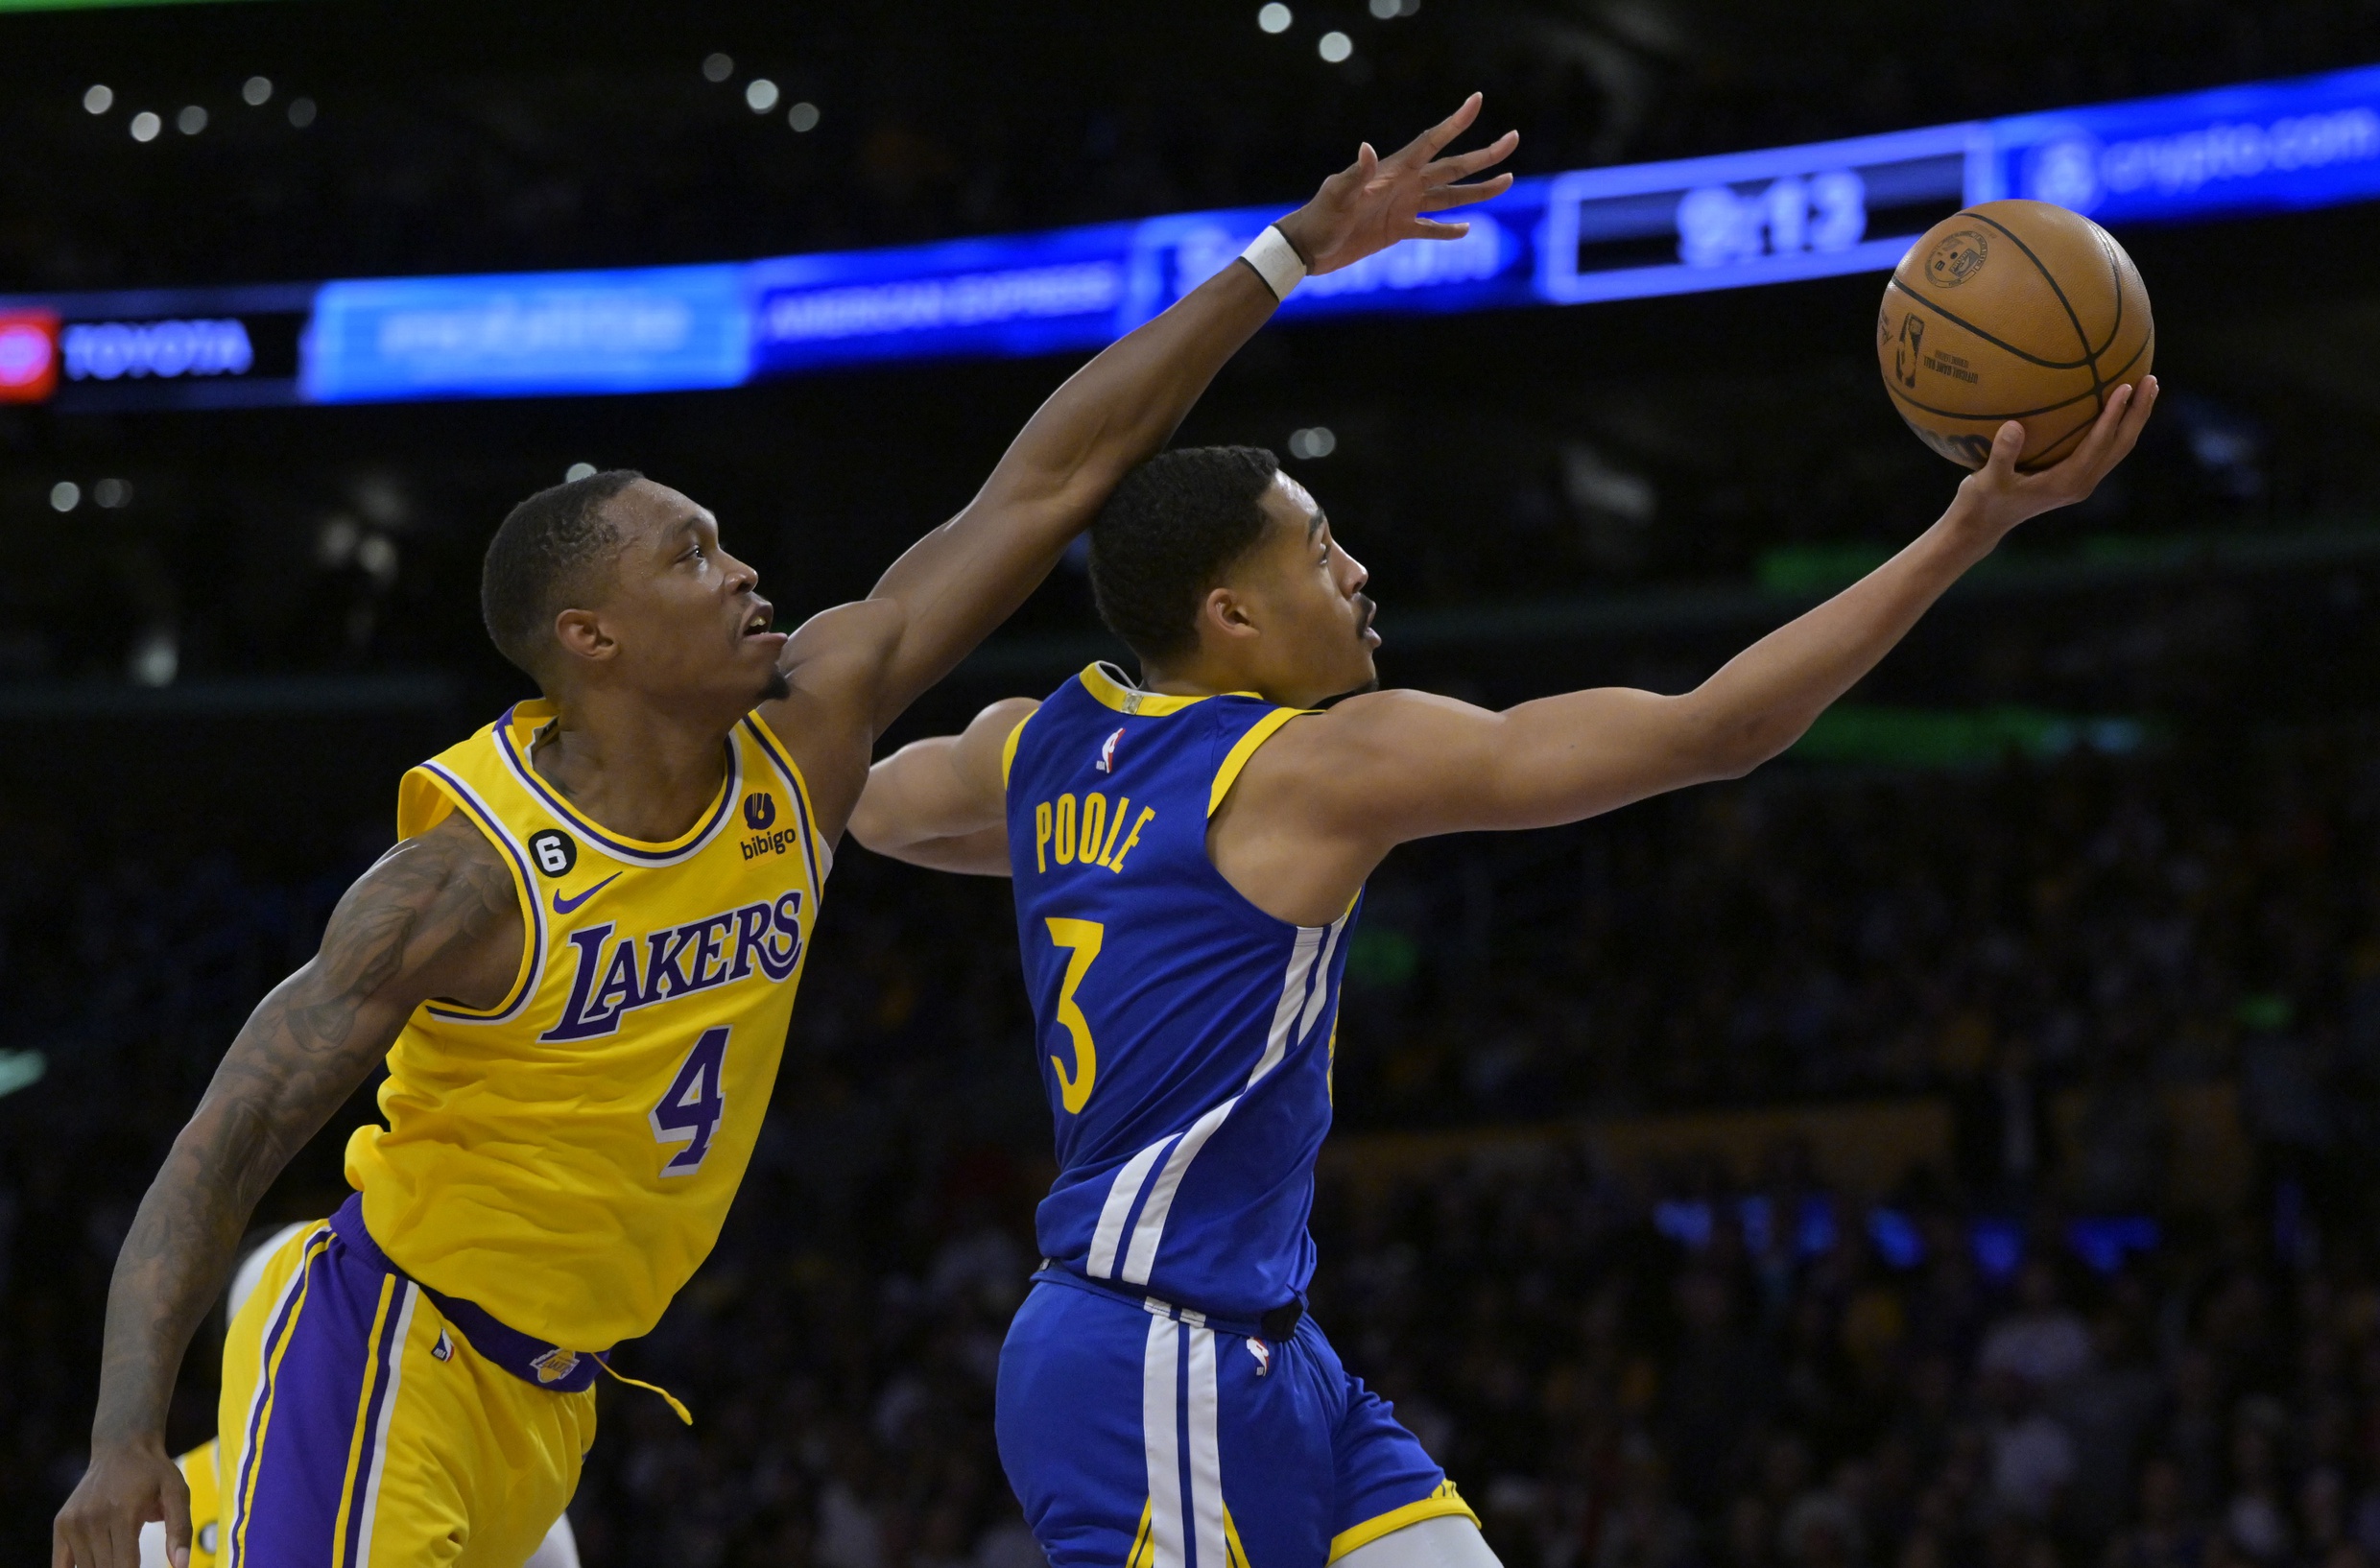 May 12, 2023; Los Angeles, California, USA; Golden State Warriors guard Jordan Poole (3) drives past Los Angeles Lakers guard Lonnie Walker IV (4) in the second half of game six of the 2023 NBA playoffs at Crypto.com Arena. Mandatory Credit: Jayne Kamin-Oncea-USA TODAY Sports